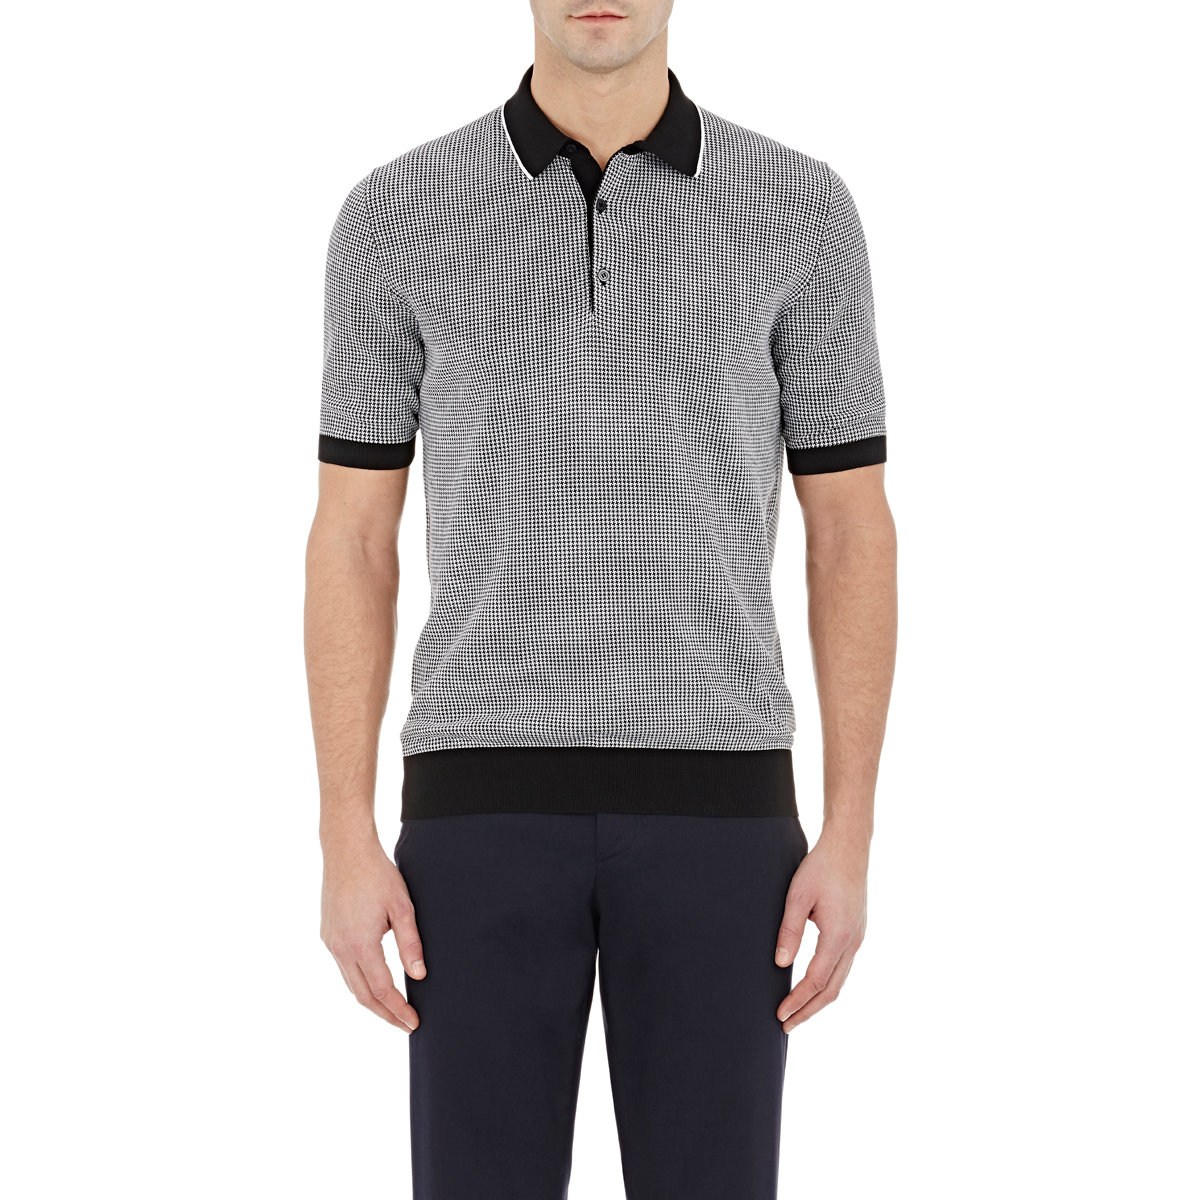 Lyst - Cifonelli Men's Houndstooth Polo Shirt in Black for Men